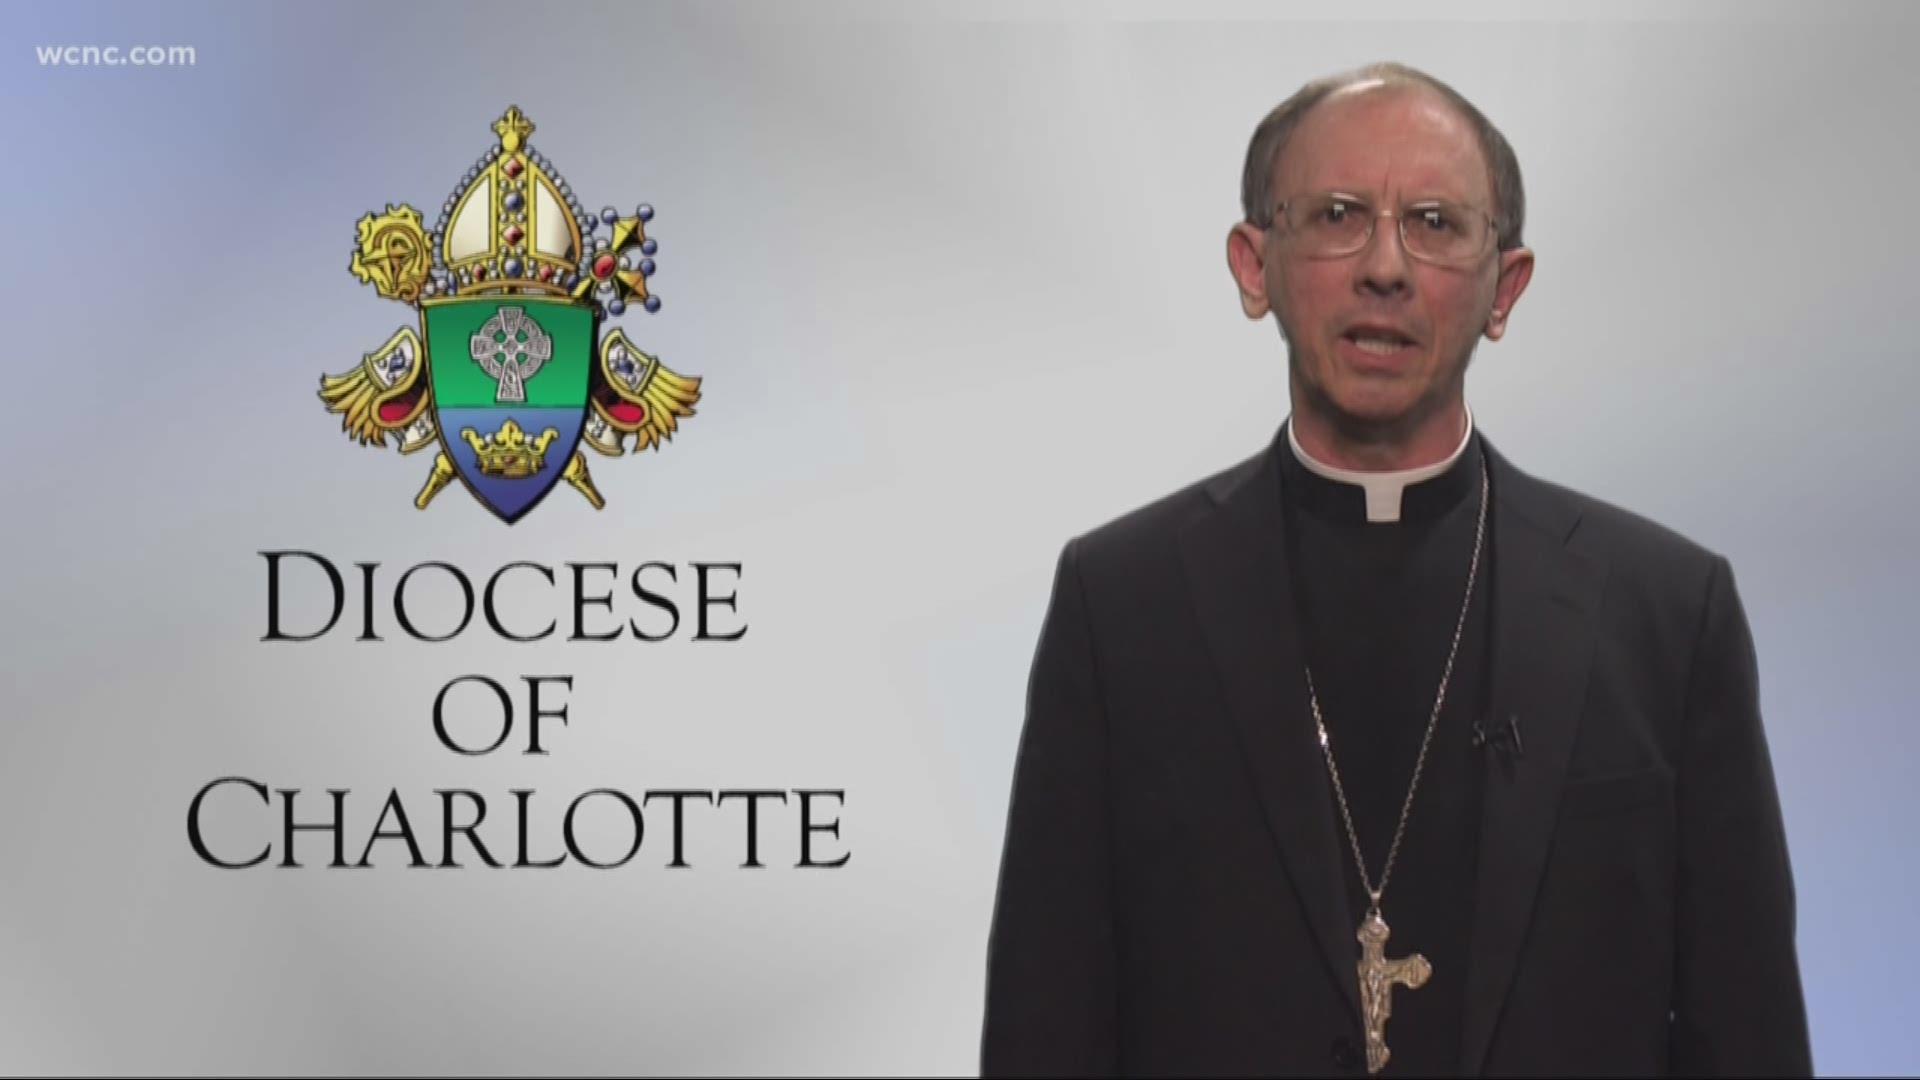 The video comes as victims and advocates push the diocese to release a list of priests accused of sexual abuse. This marked the third time Bishop Peter Jugis has addressed the abuse crisis publicly since 2004.